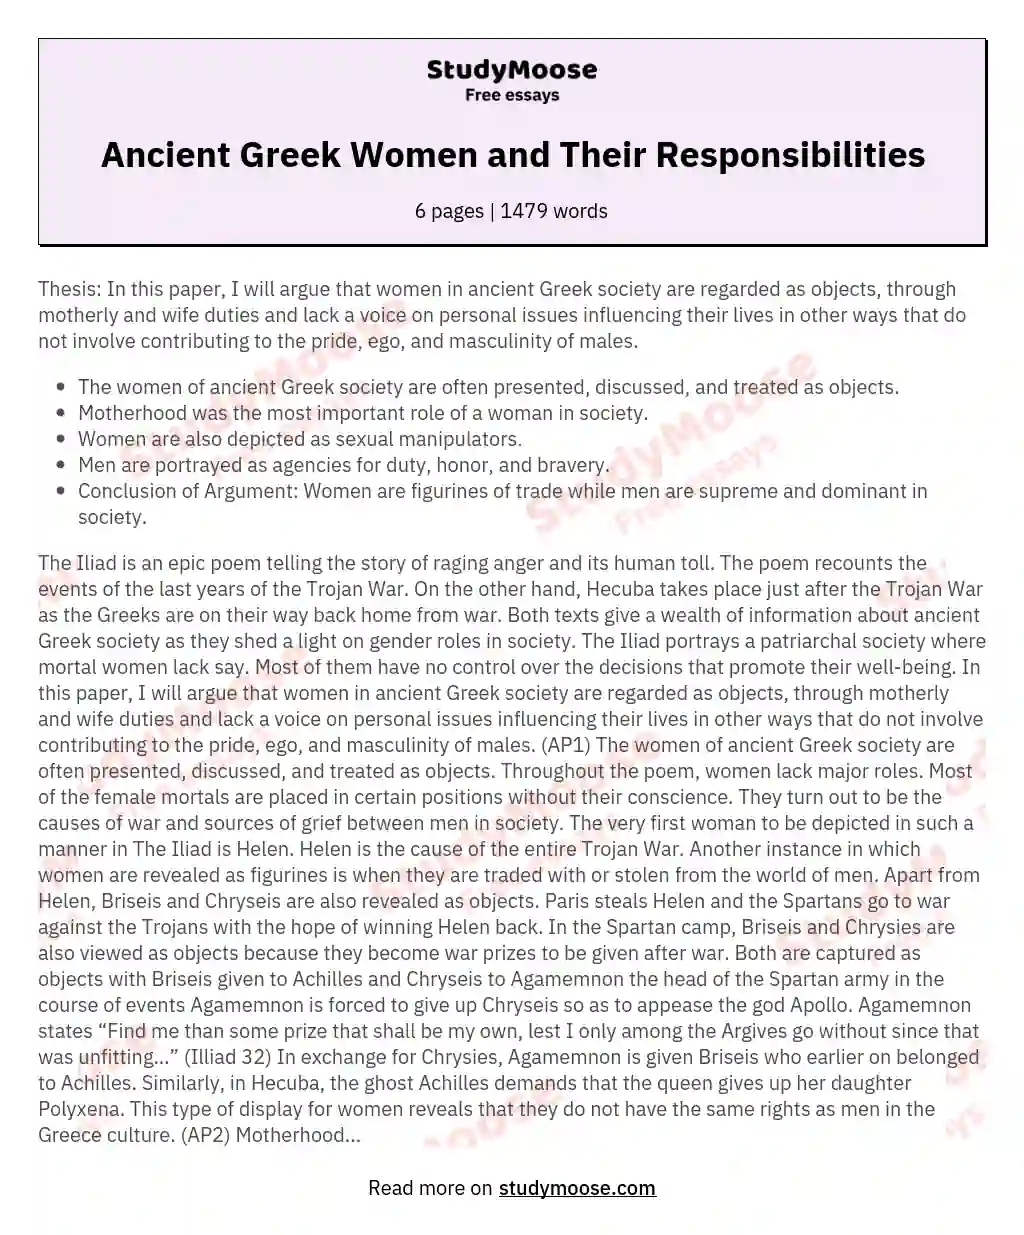 Ancient Greek Women and Their Responsibilities essay